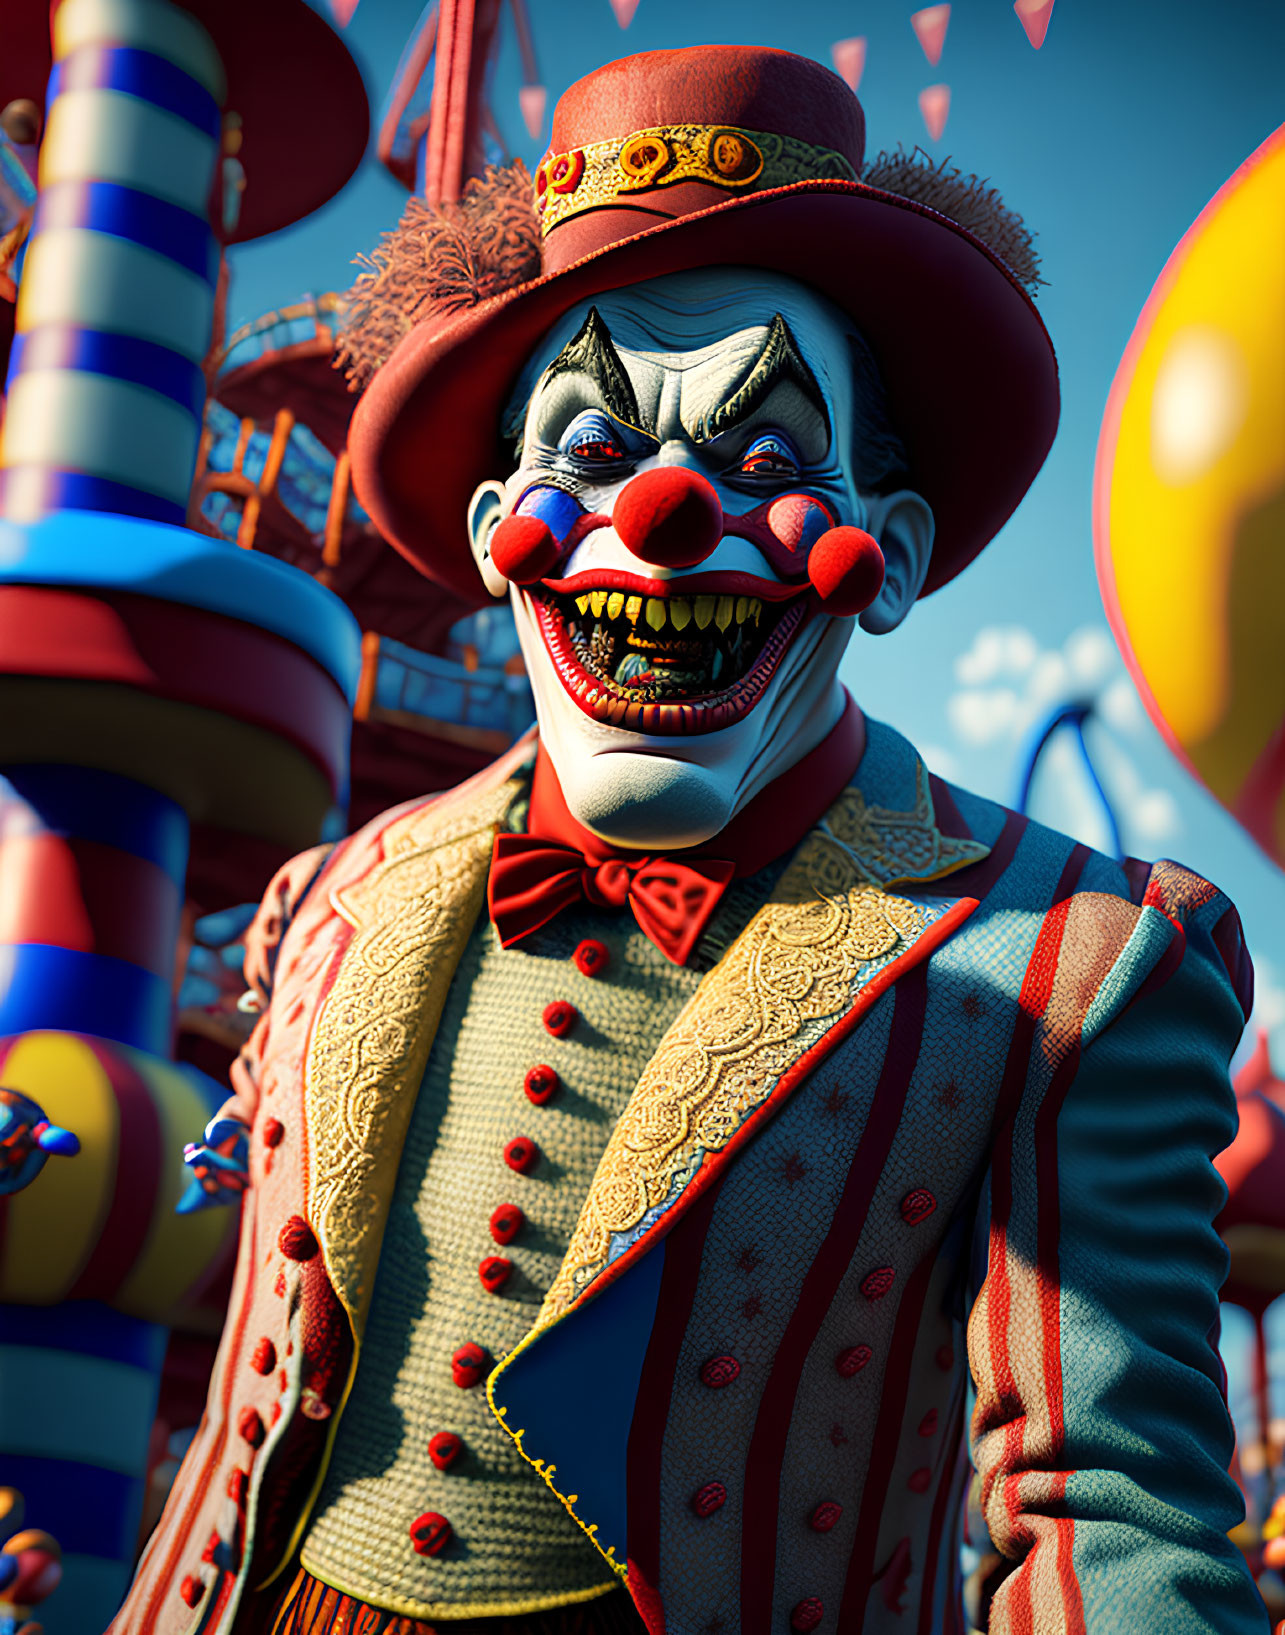 Creepy clown with sharp teeth in festive attire and carnival setting